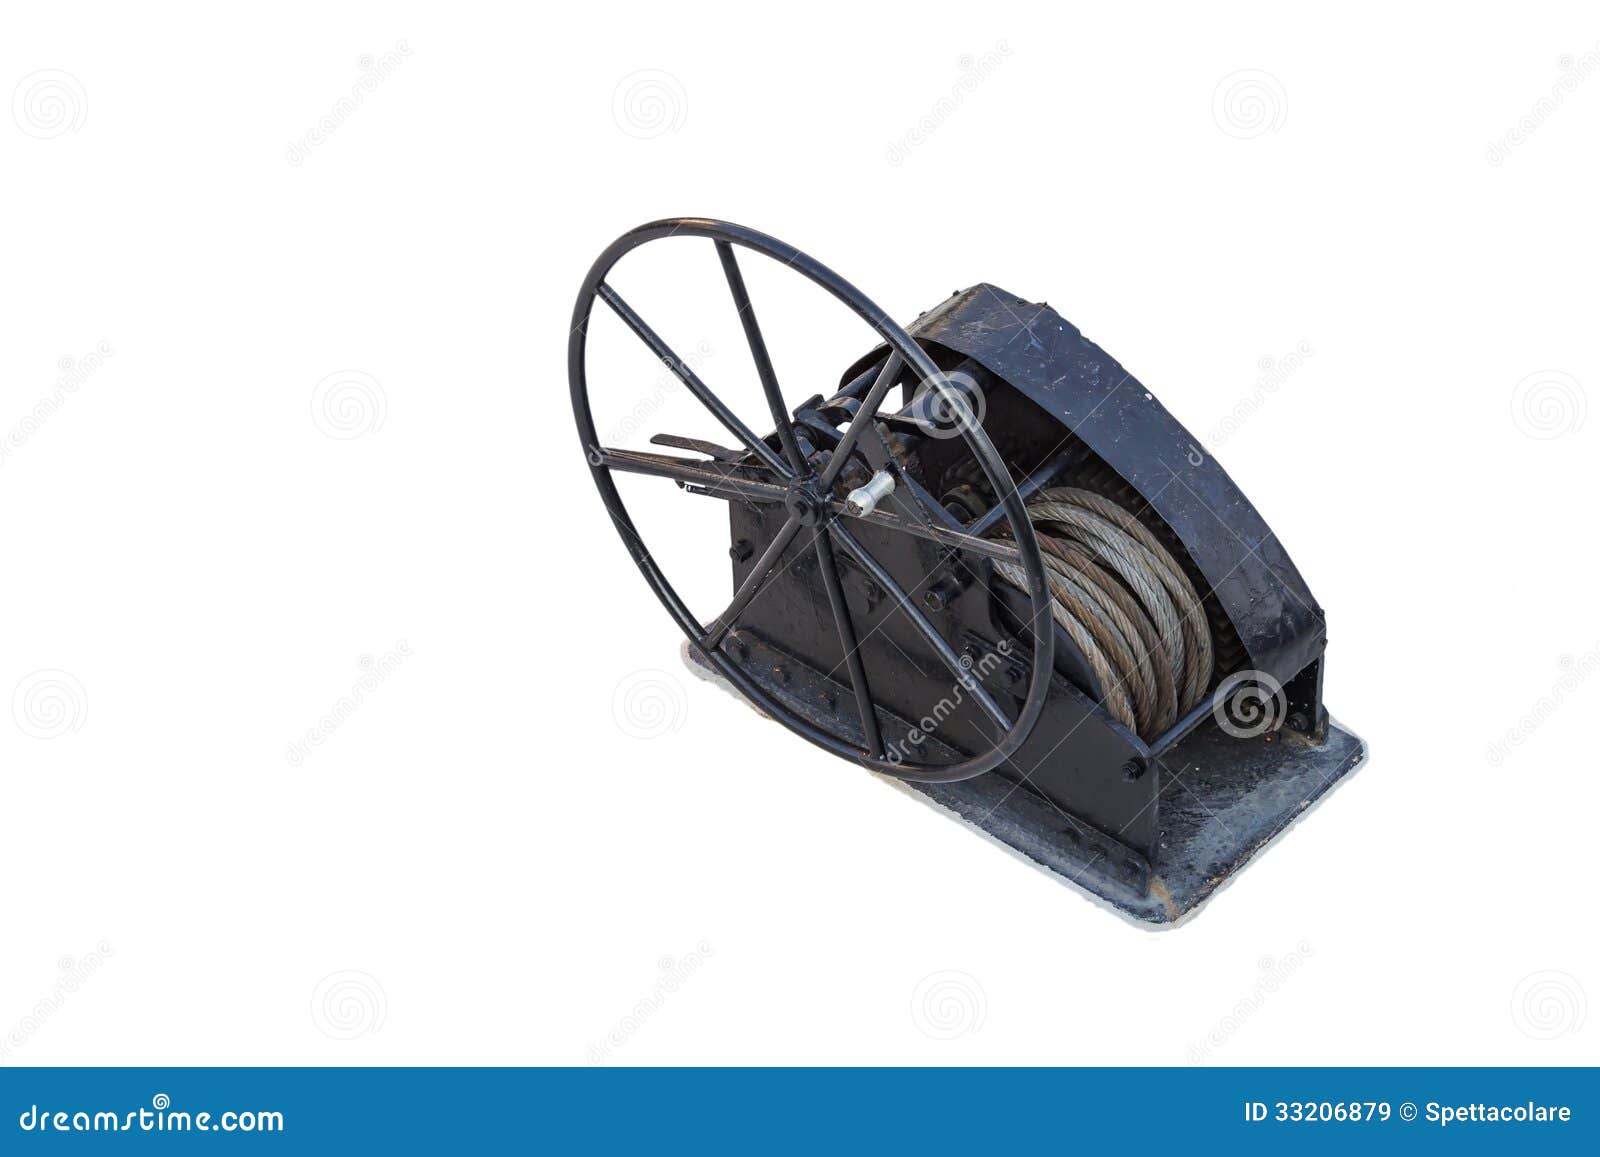 Manual Winch On Board Royalty Free Stock Images - Image: 33206879